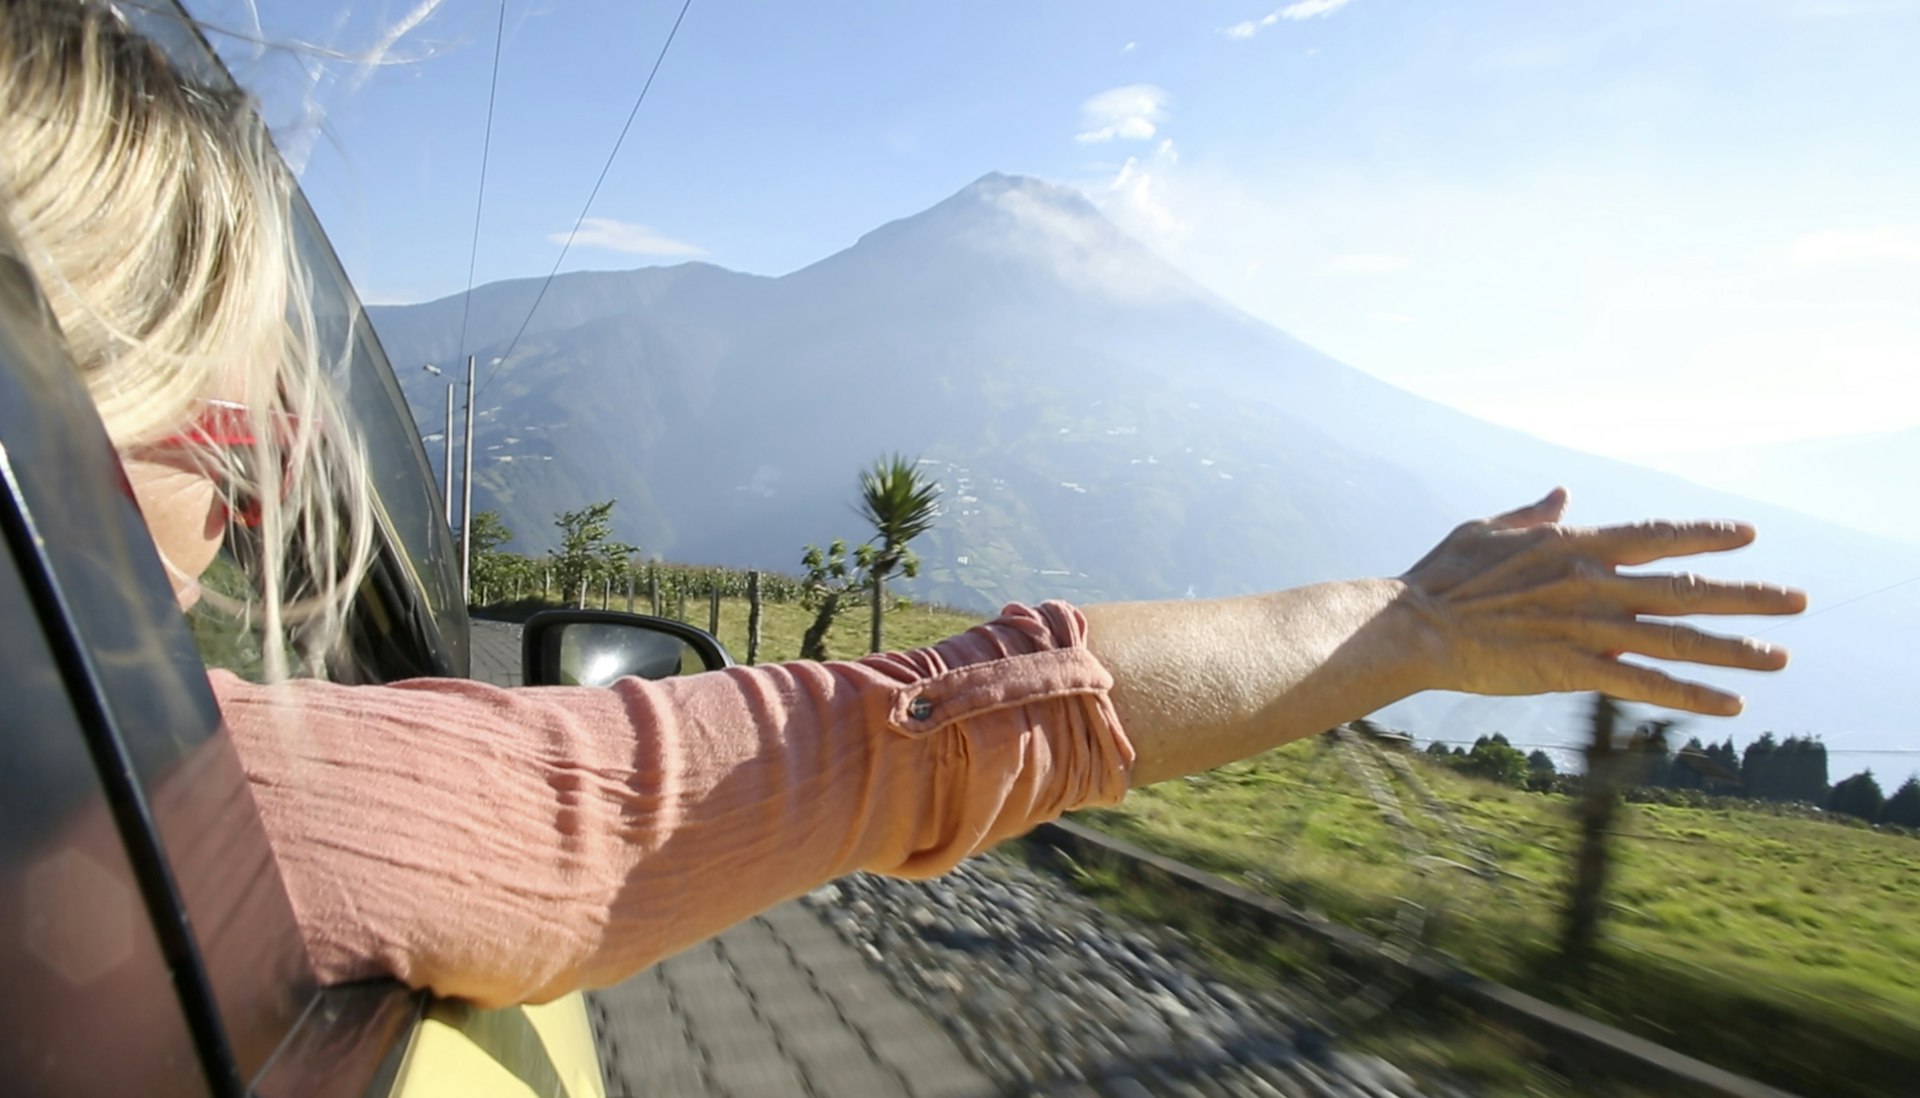 A woman with her arm outstretched from a car window in Ecuador. A mountain is in the background.